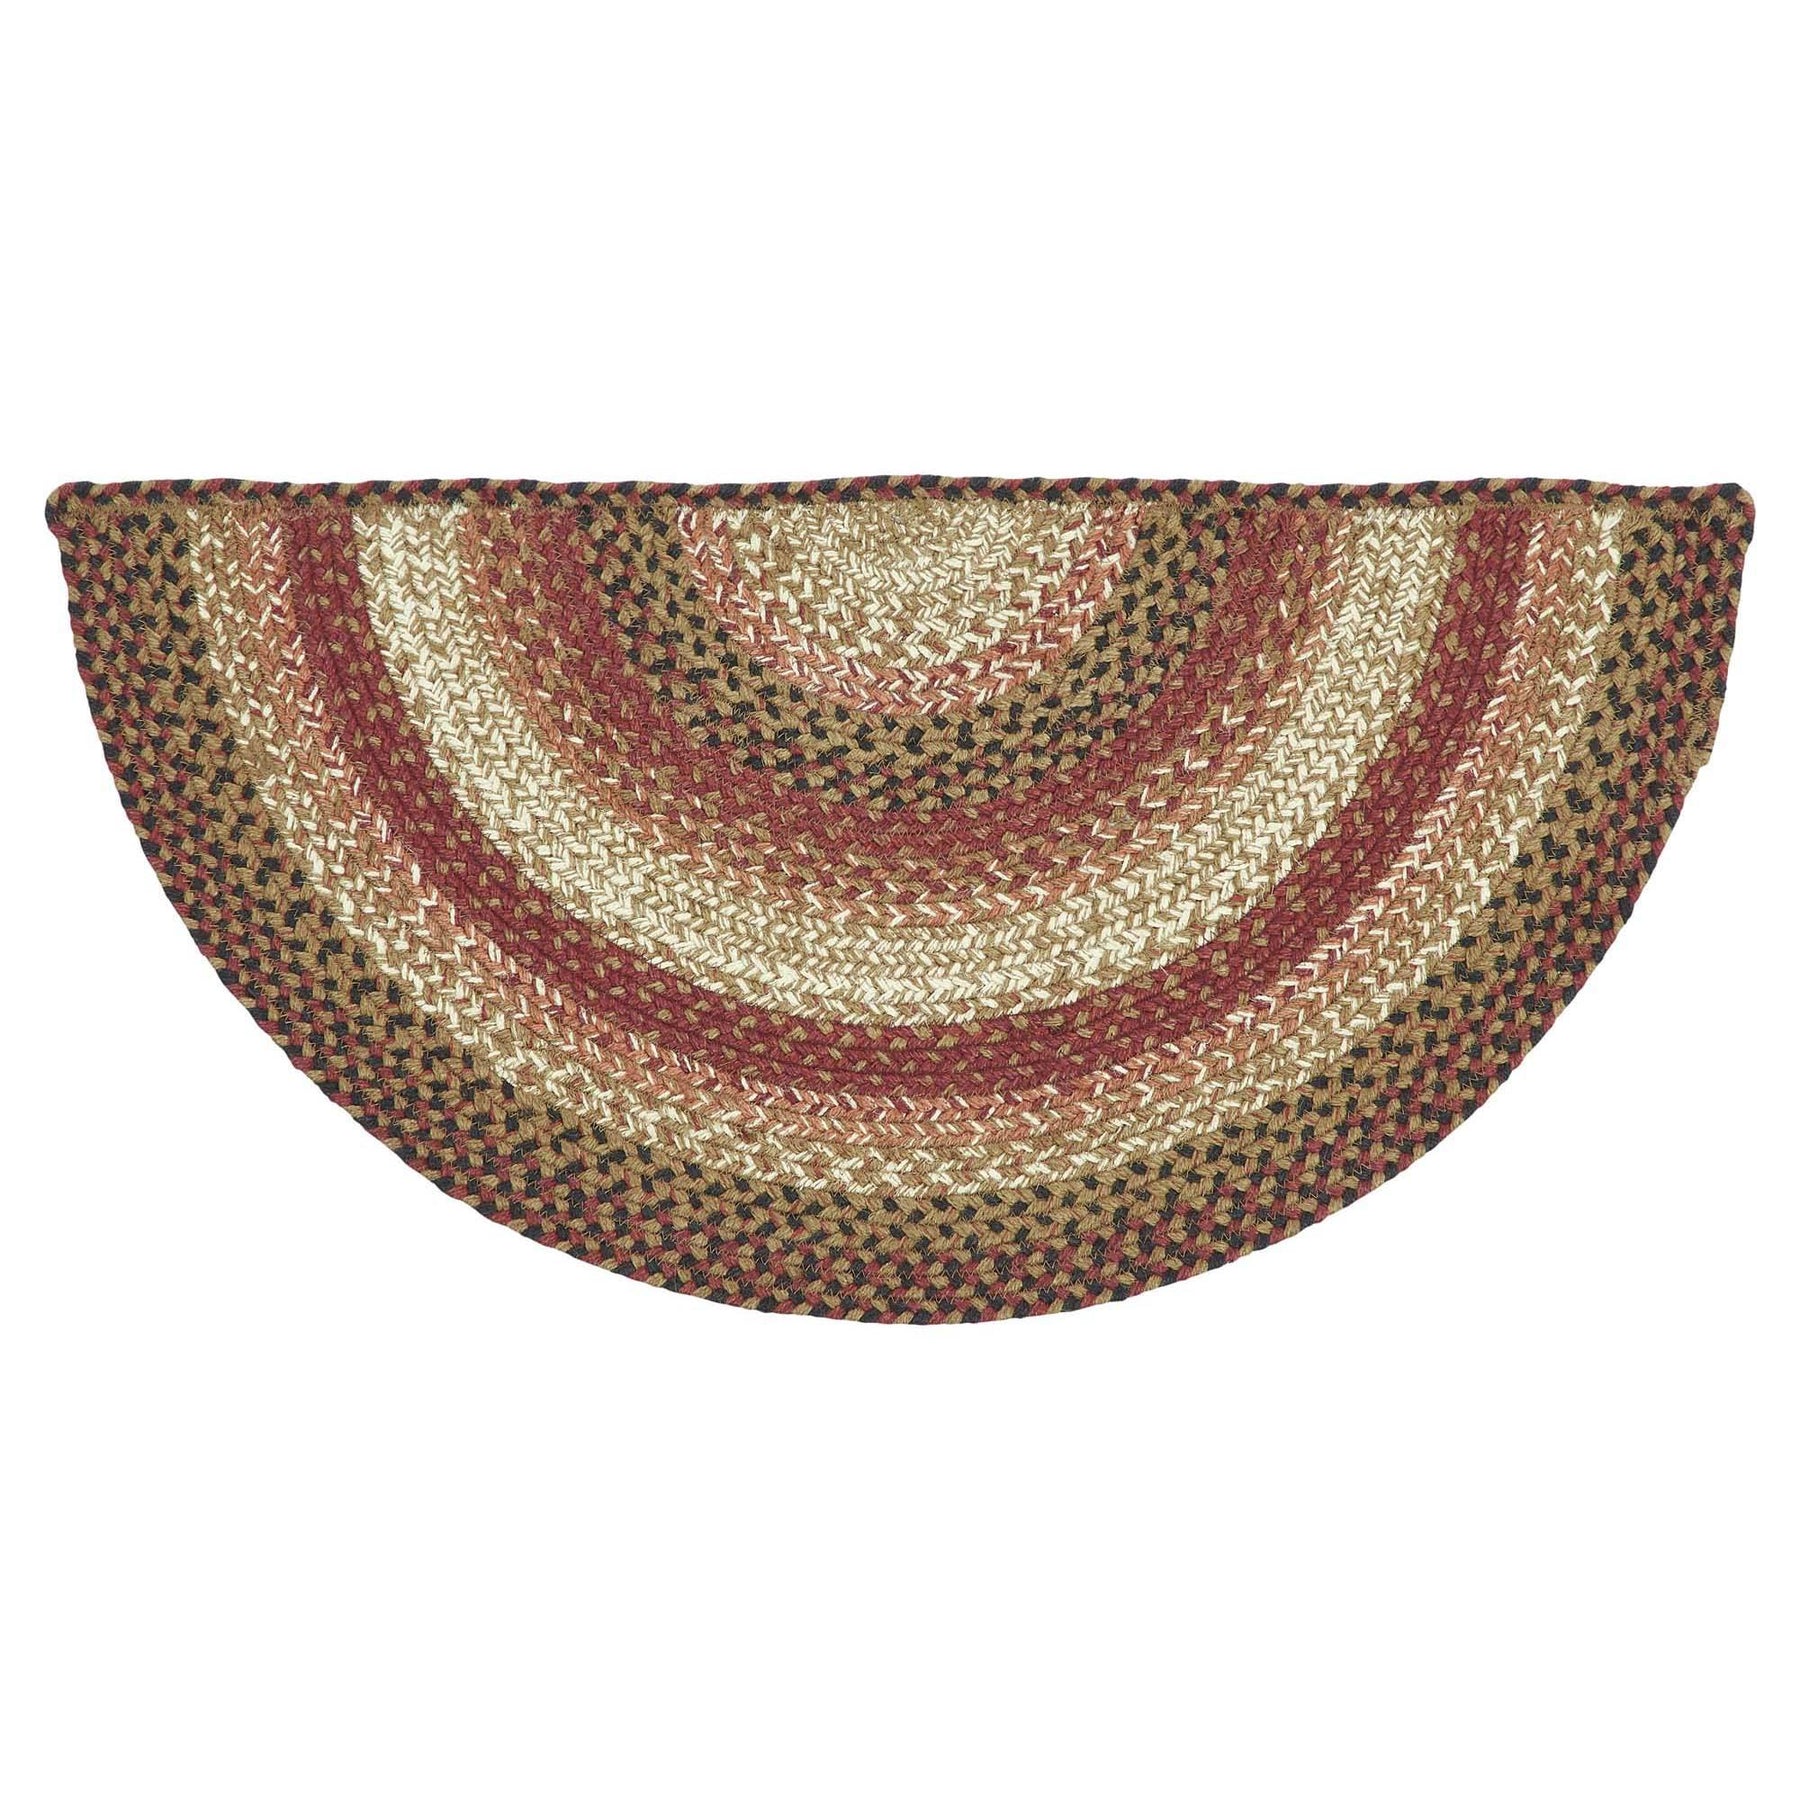 Ginger Spice Oval Braided Rug 27x48 - with Pad Default